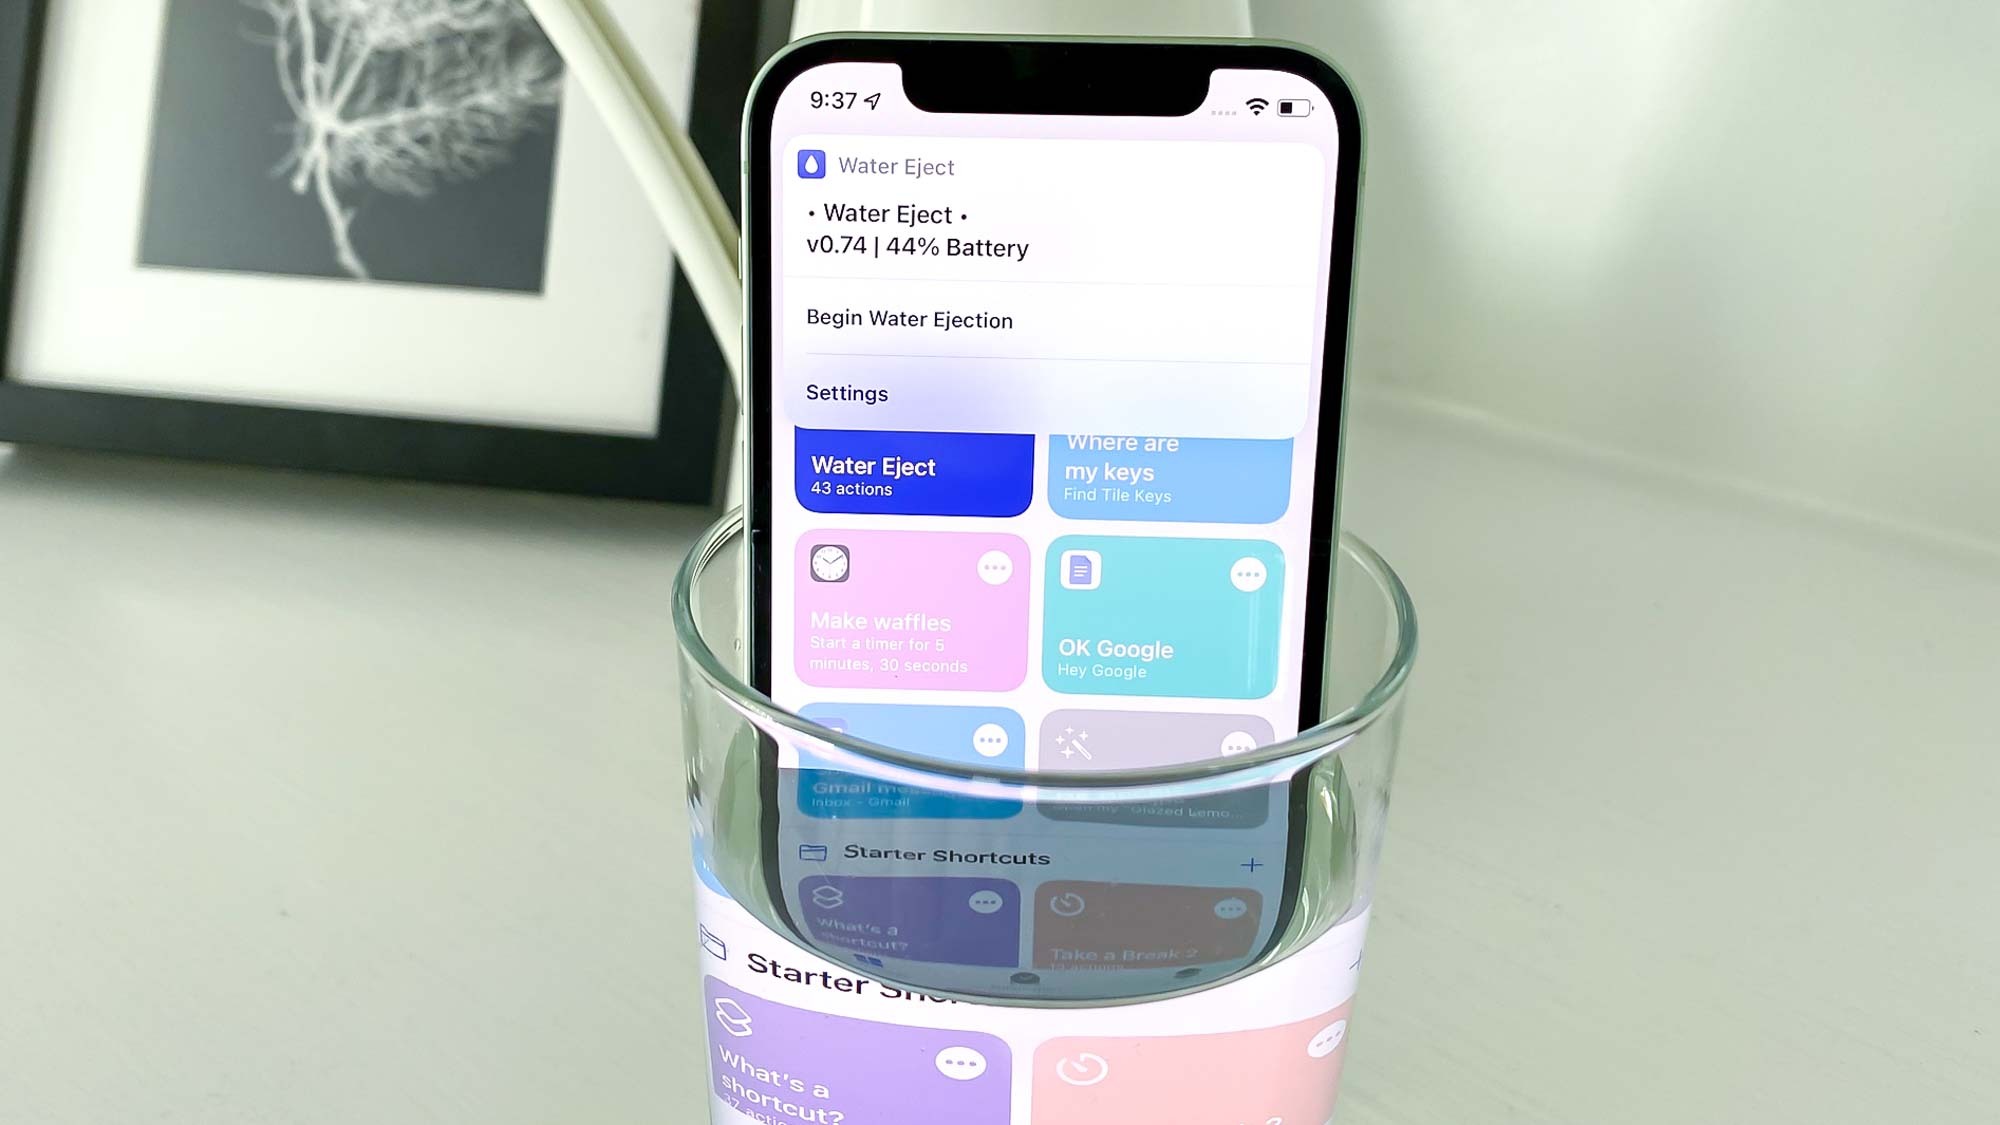 How to eject water from an iPhone using Shortcuts